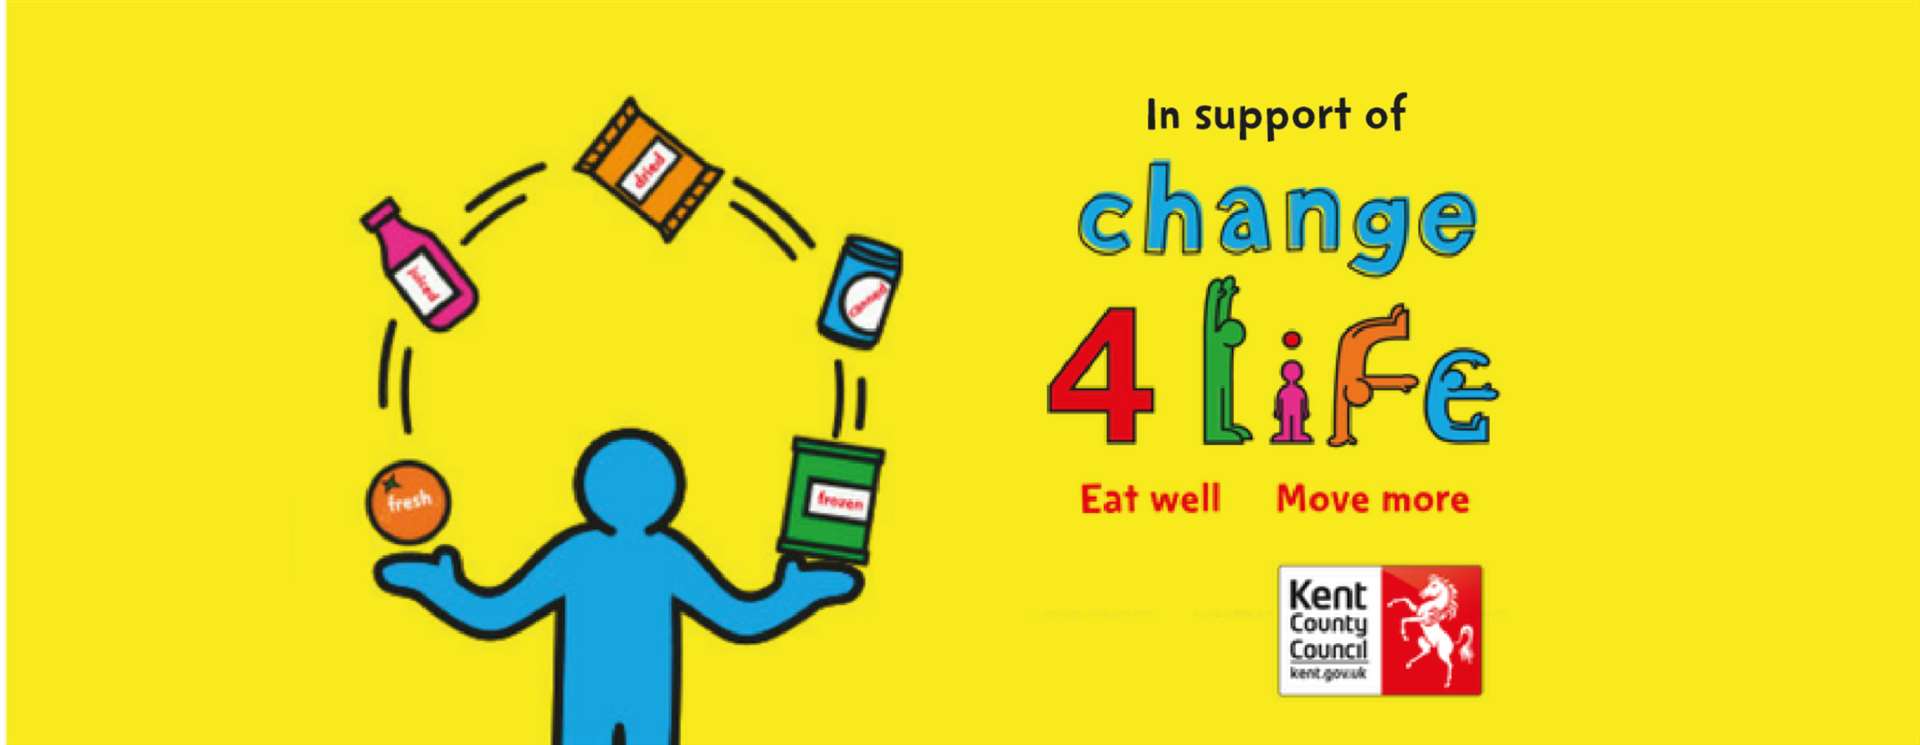 You can also check out Change4Life Kent on Facebook